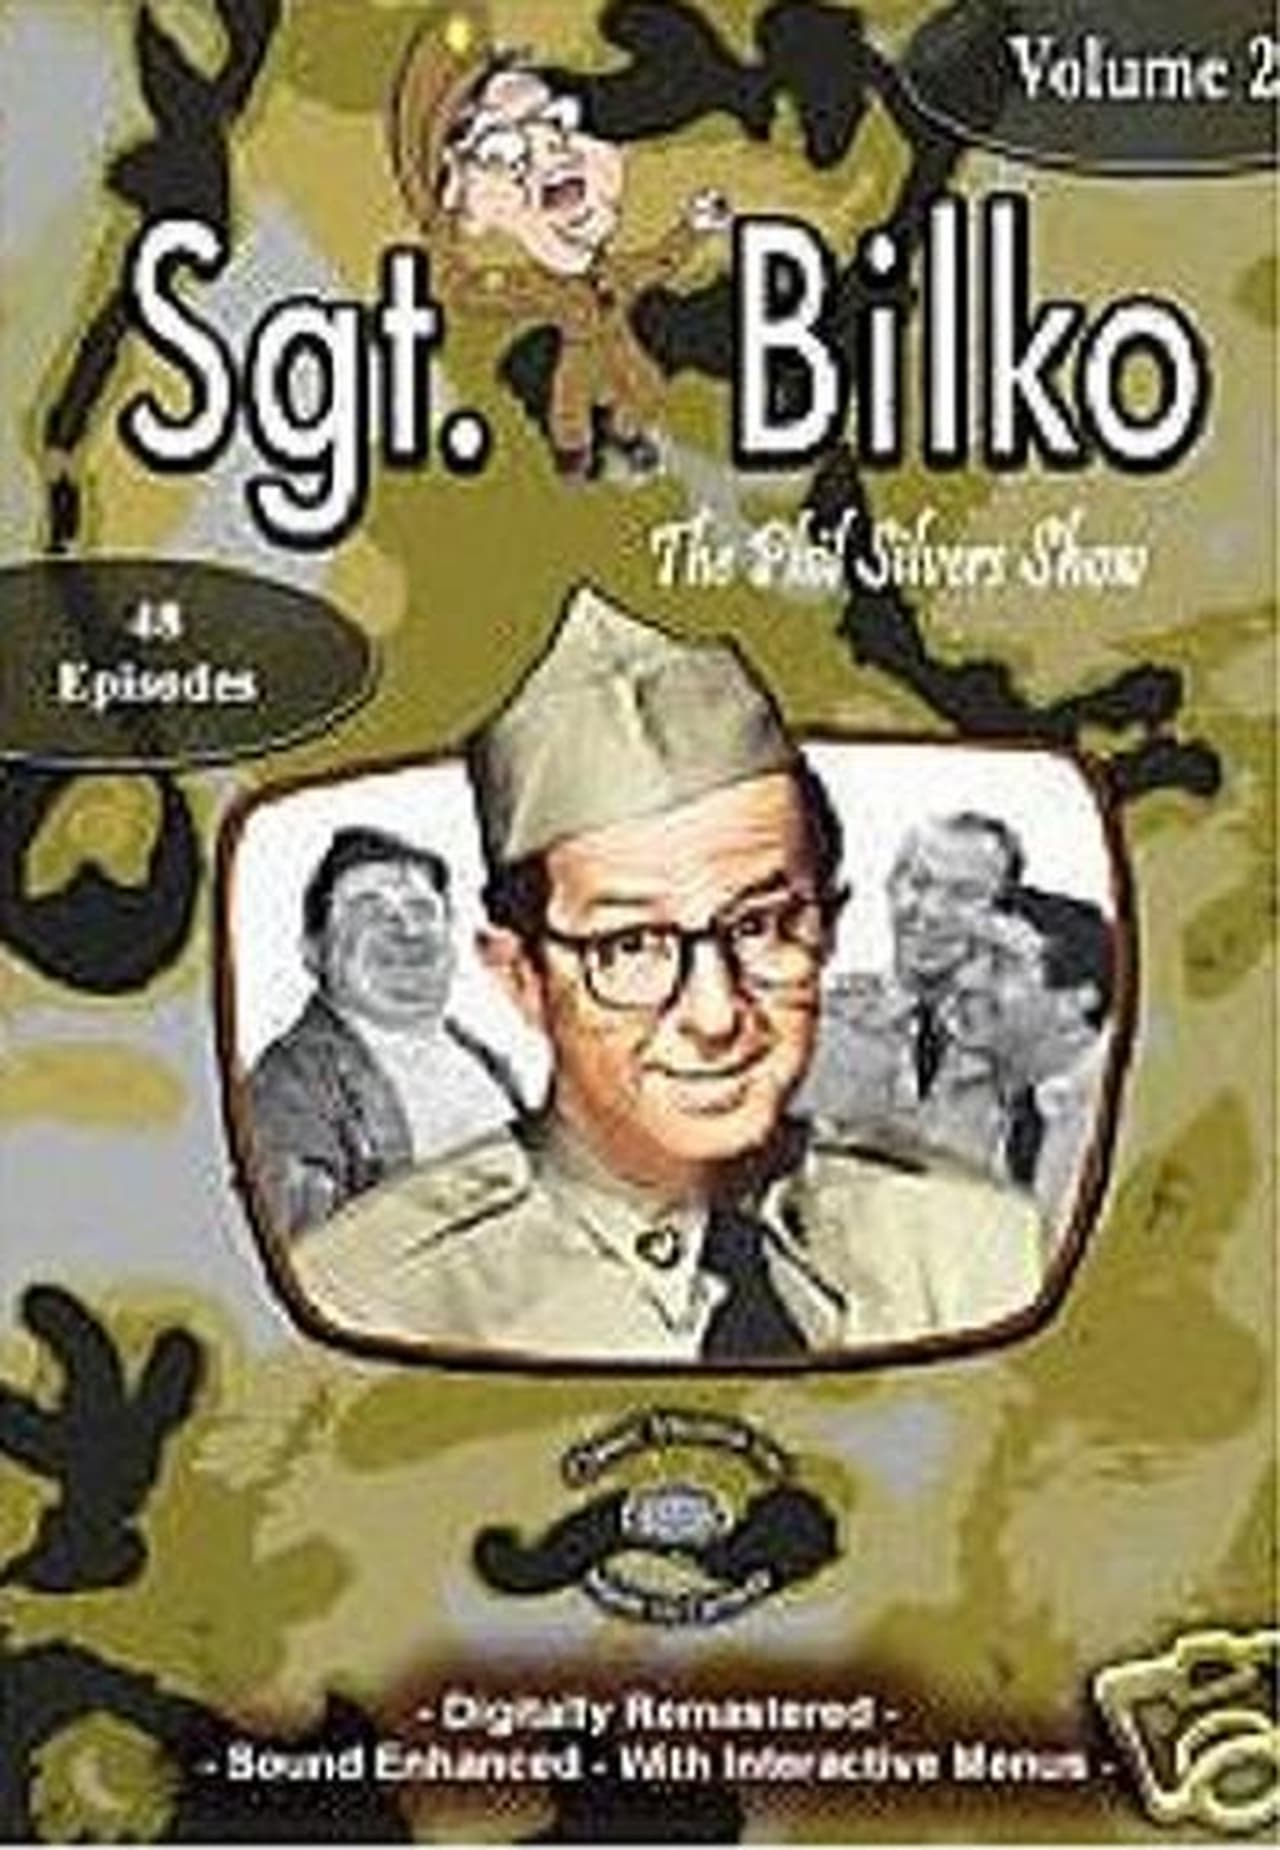 The Phil Silvers Show (1956)